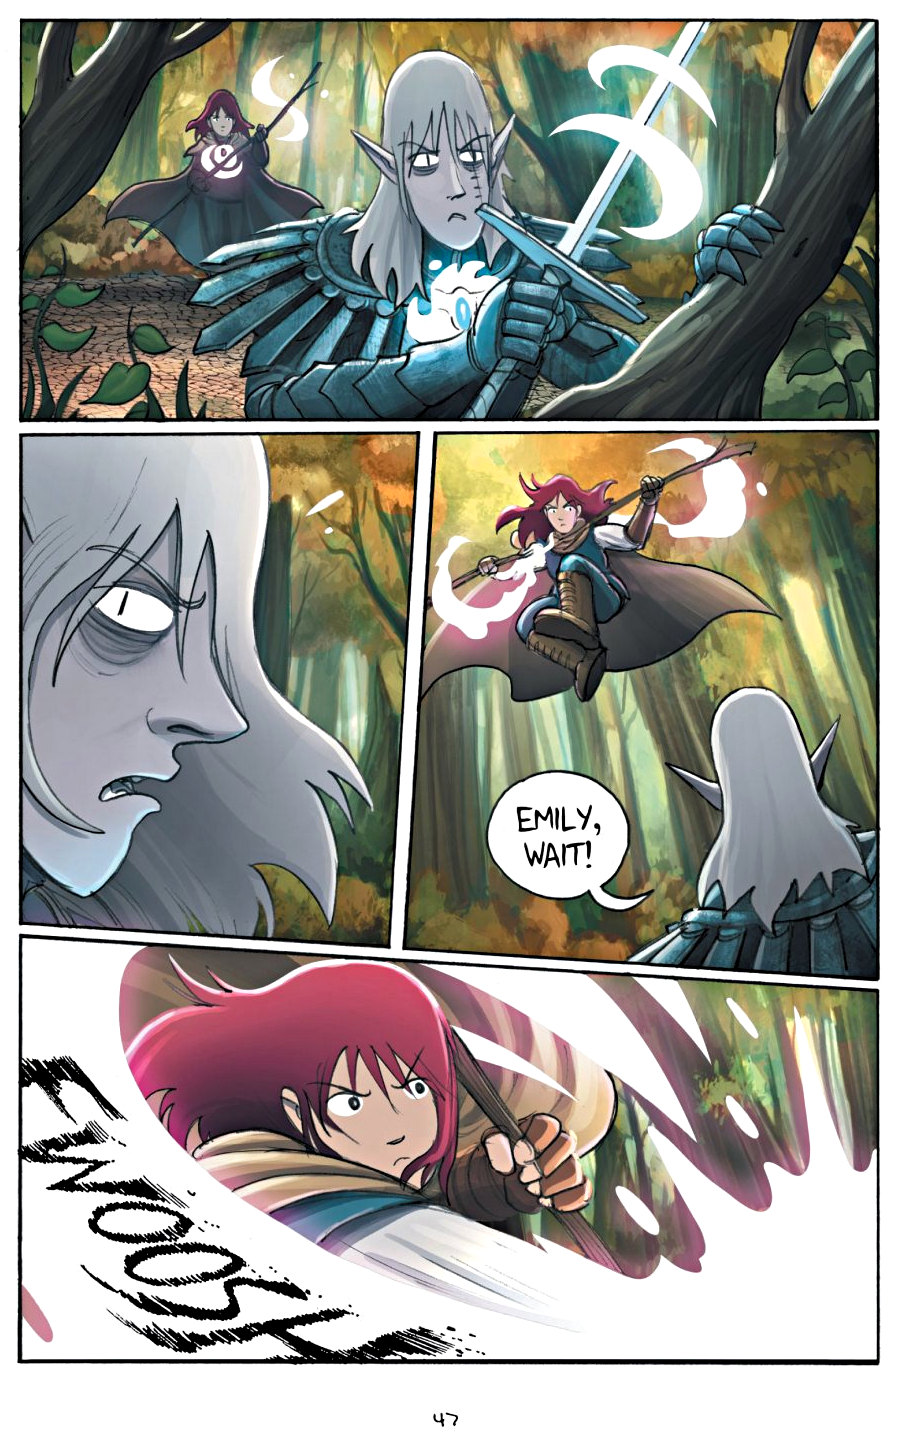 page 47 of amulet 5 prince of the elves graphic novel